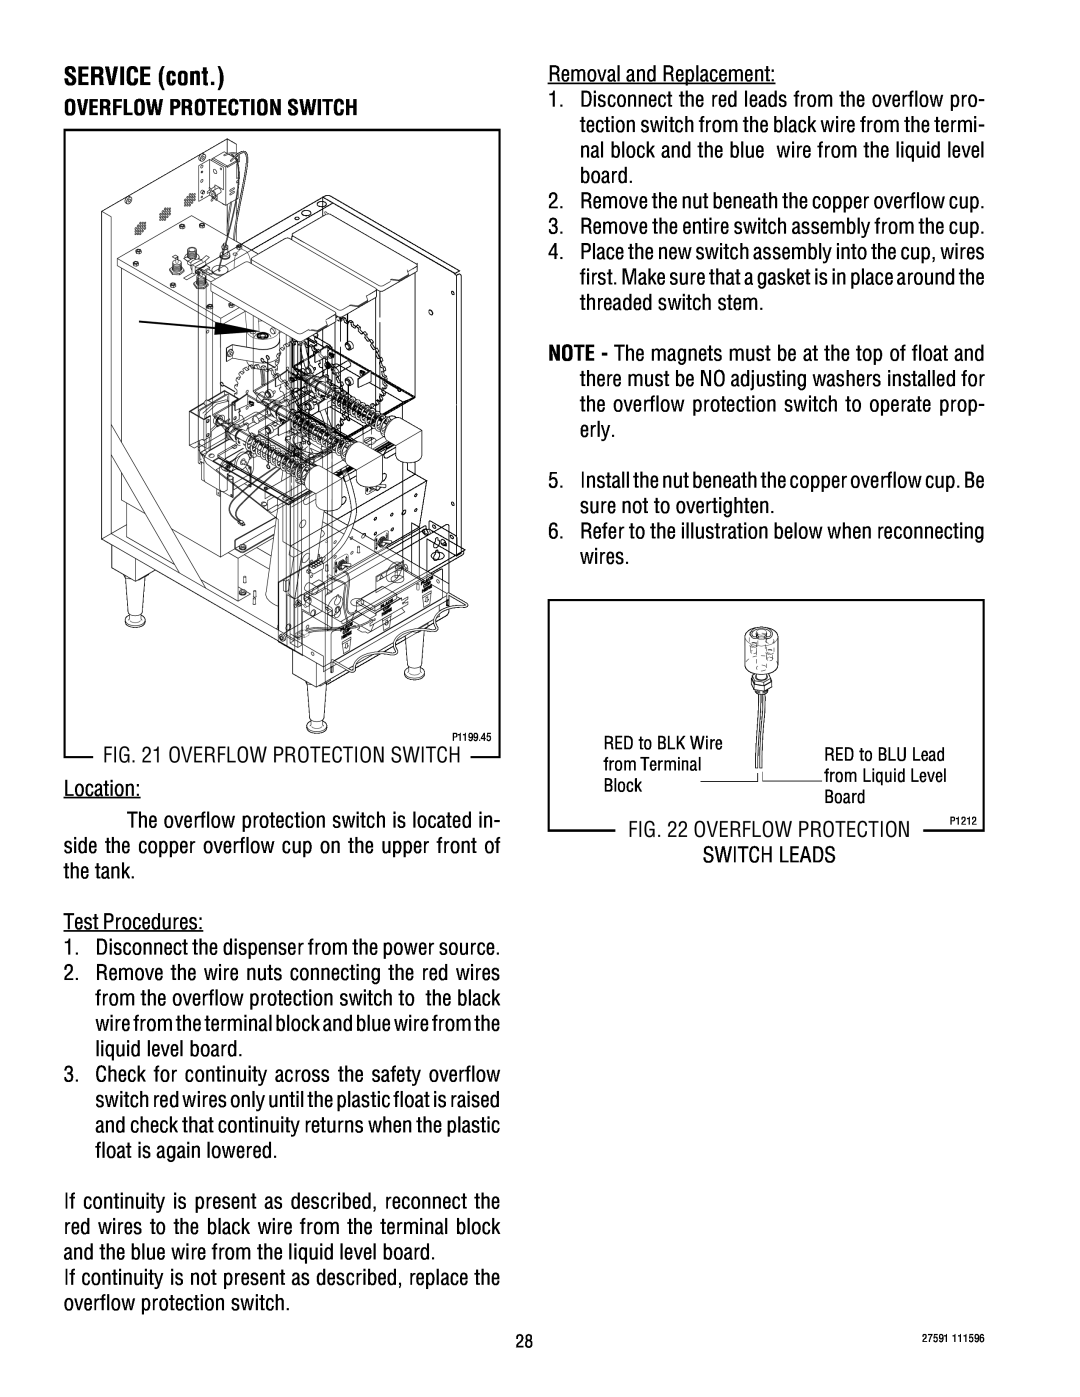 Bunn HC-3 service manual Overflow Protection Switch, SERVICE cont 